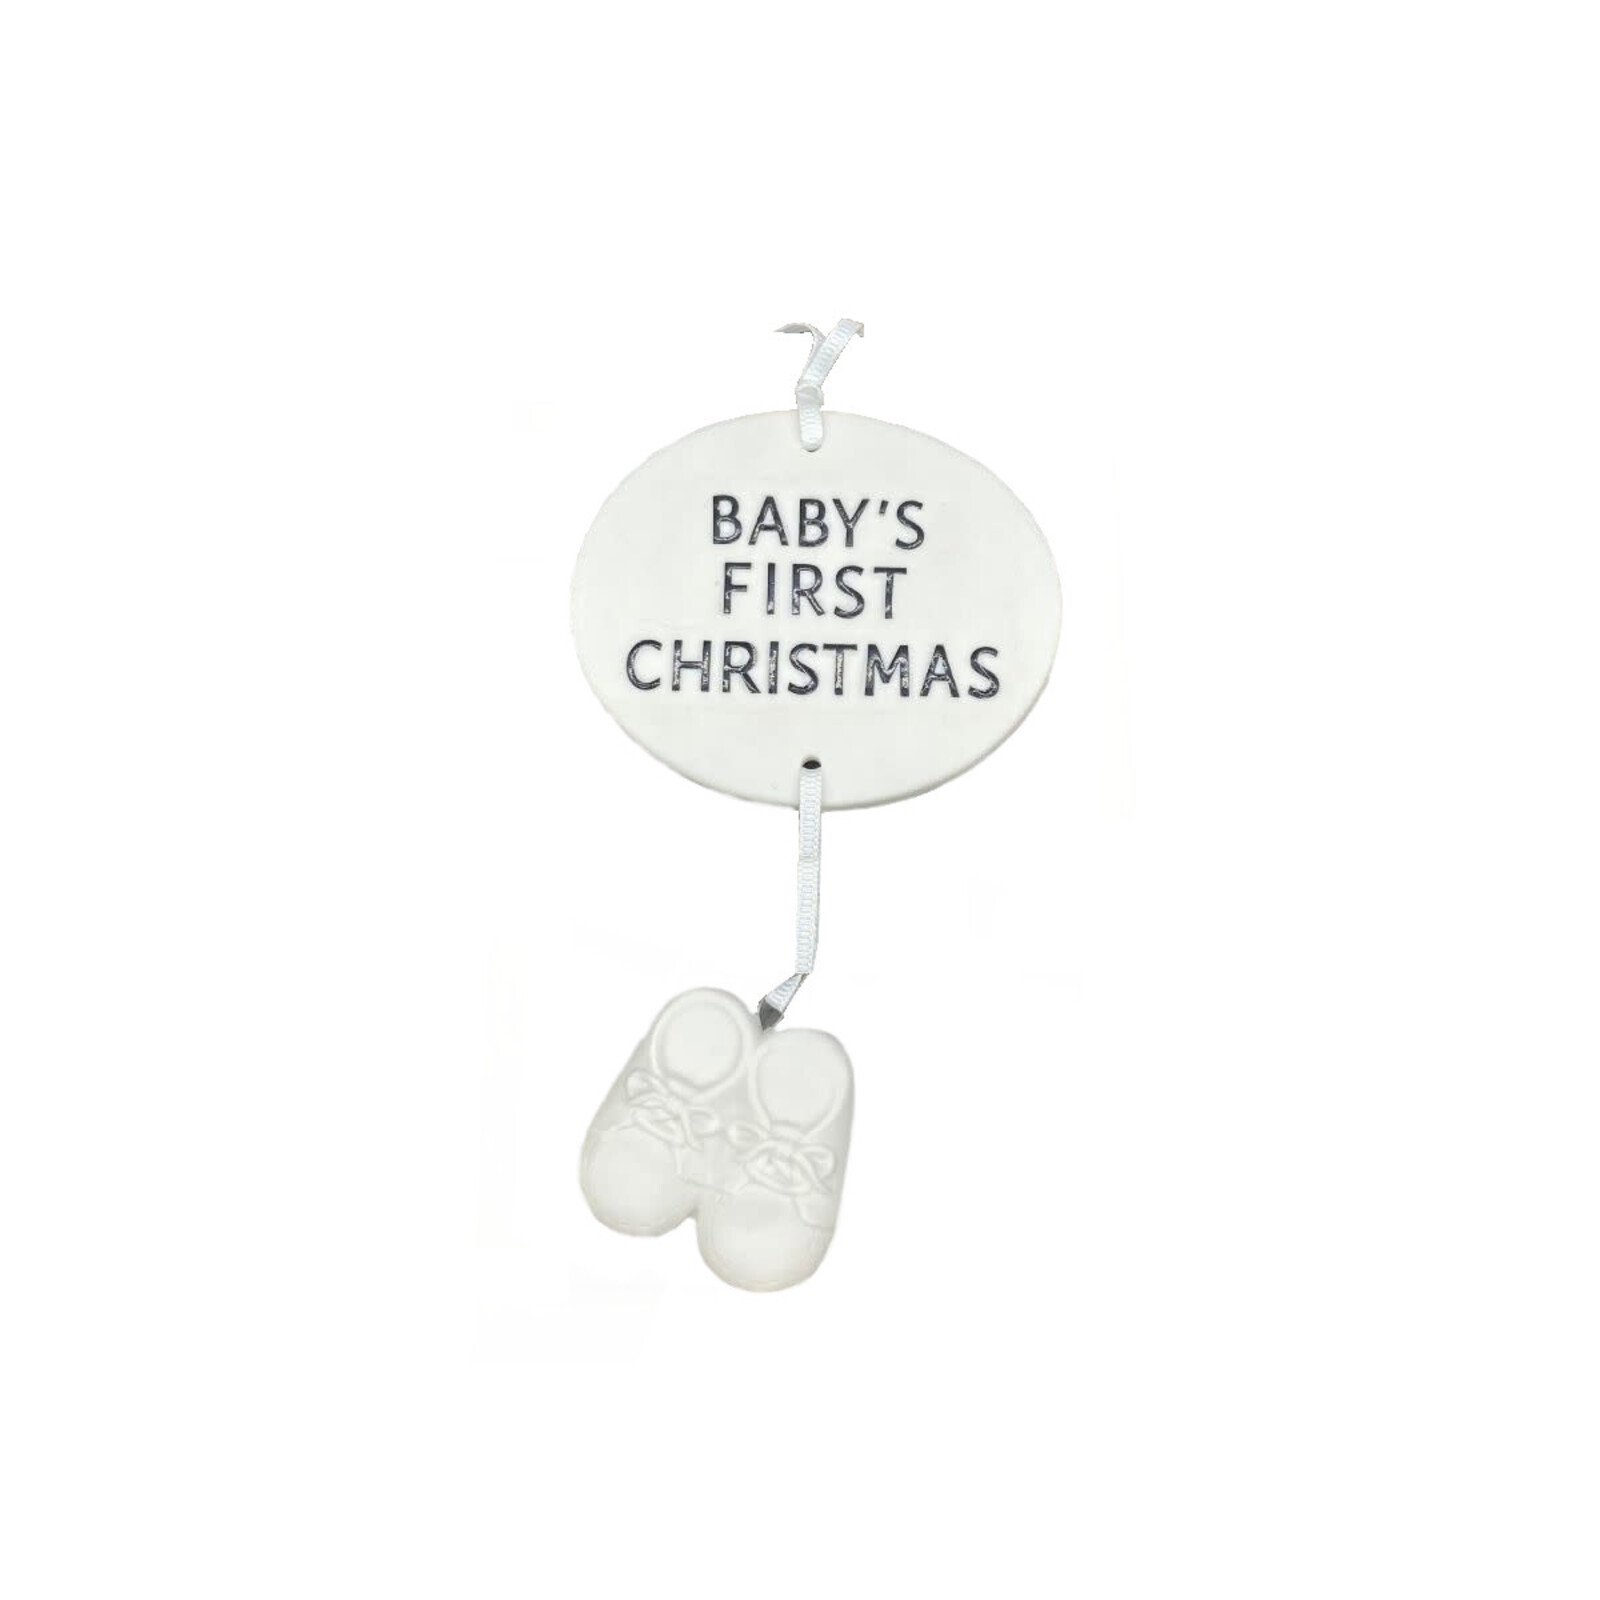 Cypress Home White Ceramic Baby's 1st Christmas  Ornament in Gift Box 3OTC7172A loading=